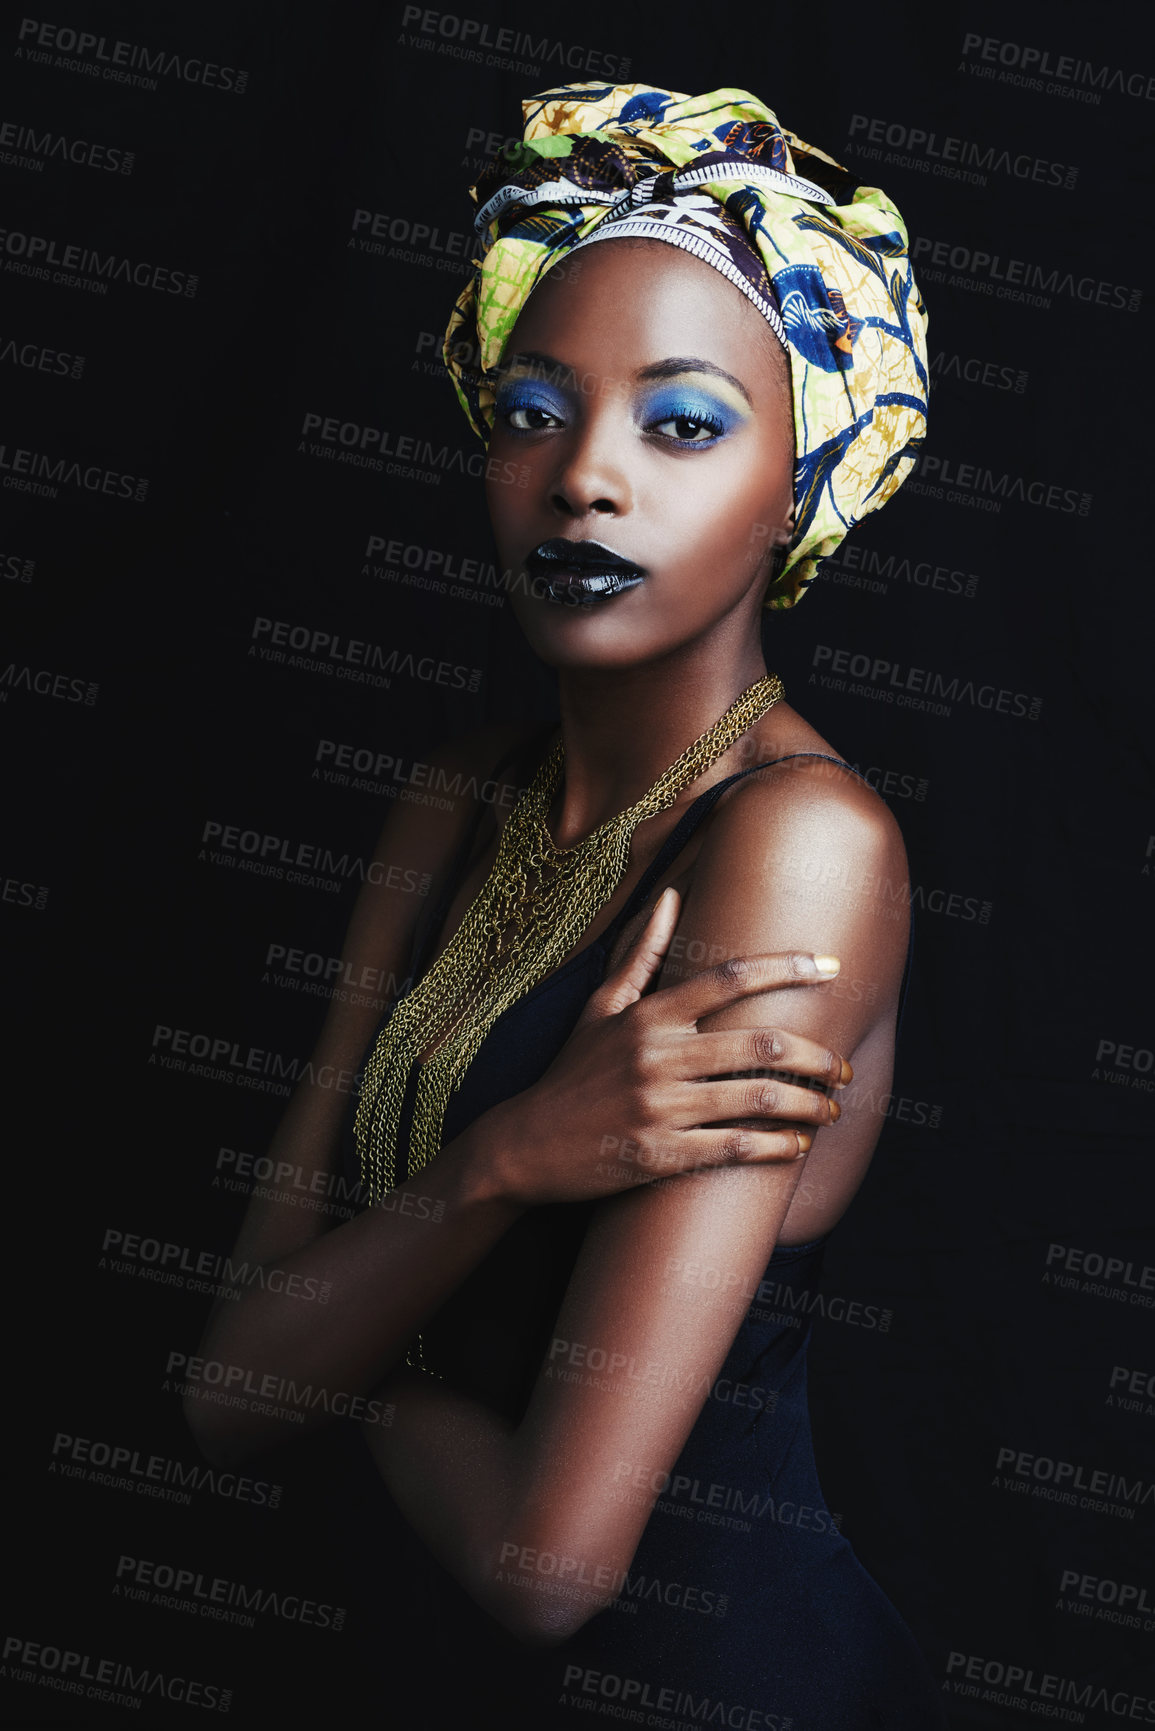 Buy stock photo A beautiful african woman posing against a black background